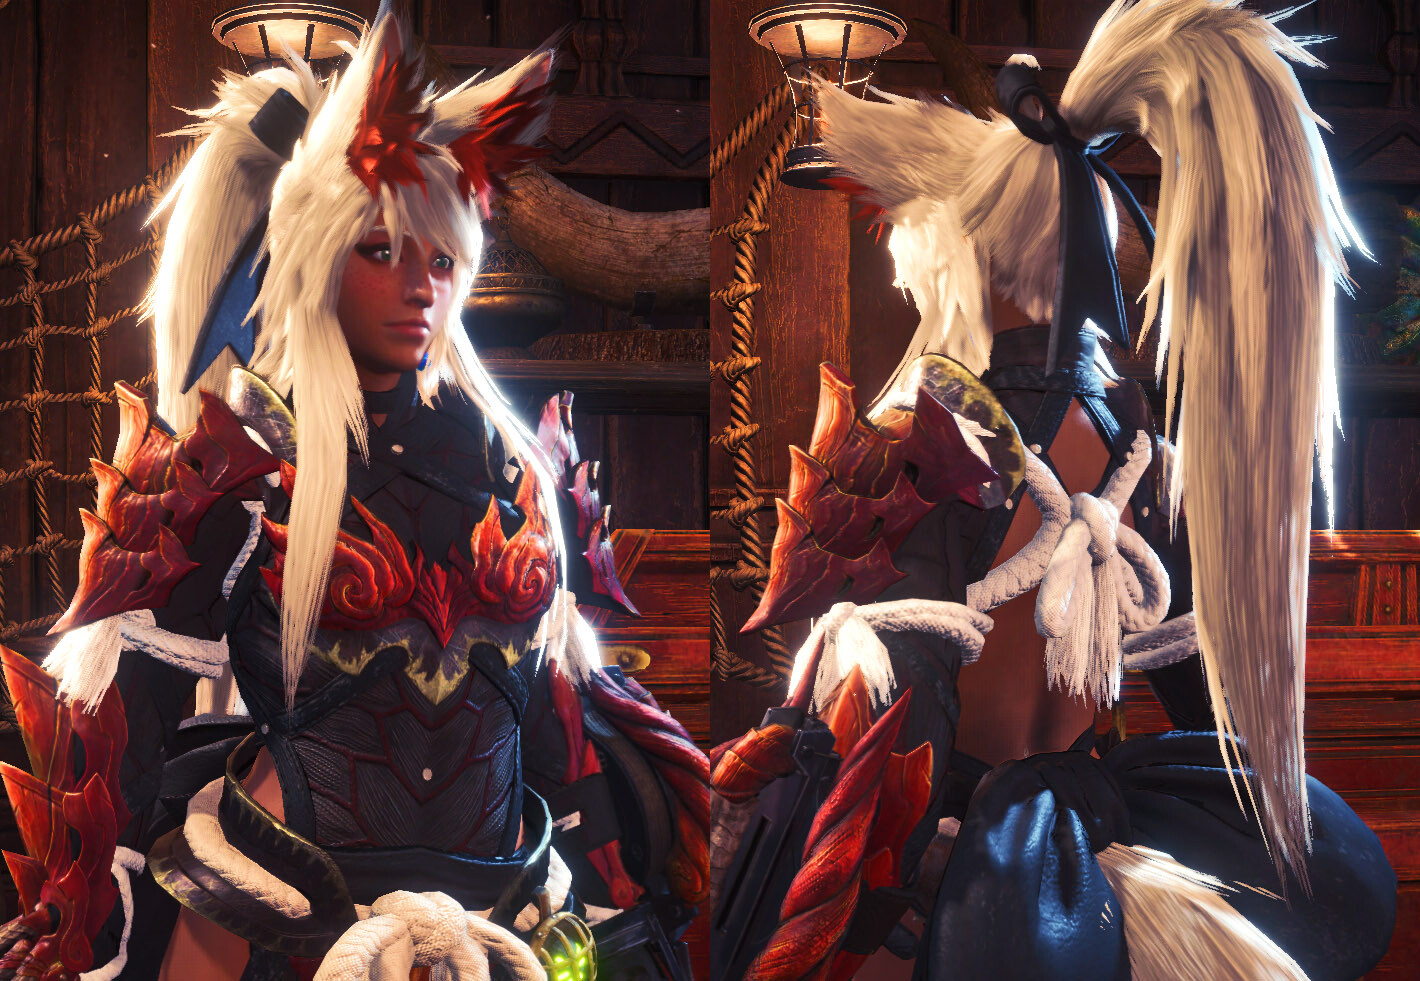 The person who uses this hair also uses an altered version of the fox ear mod, so here it is together